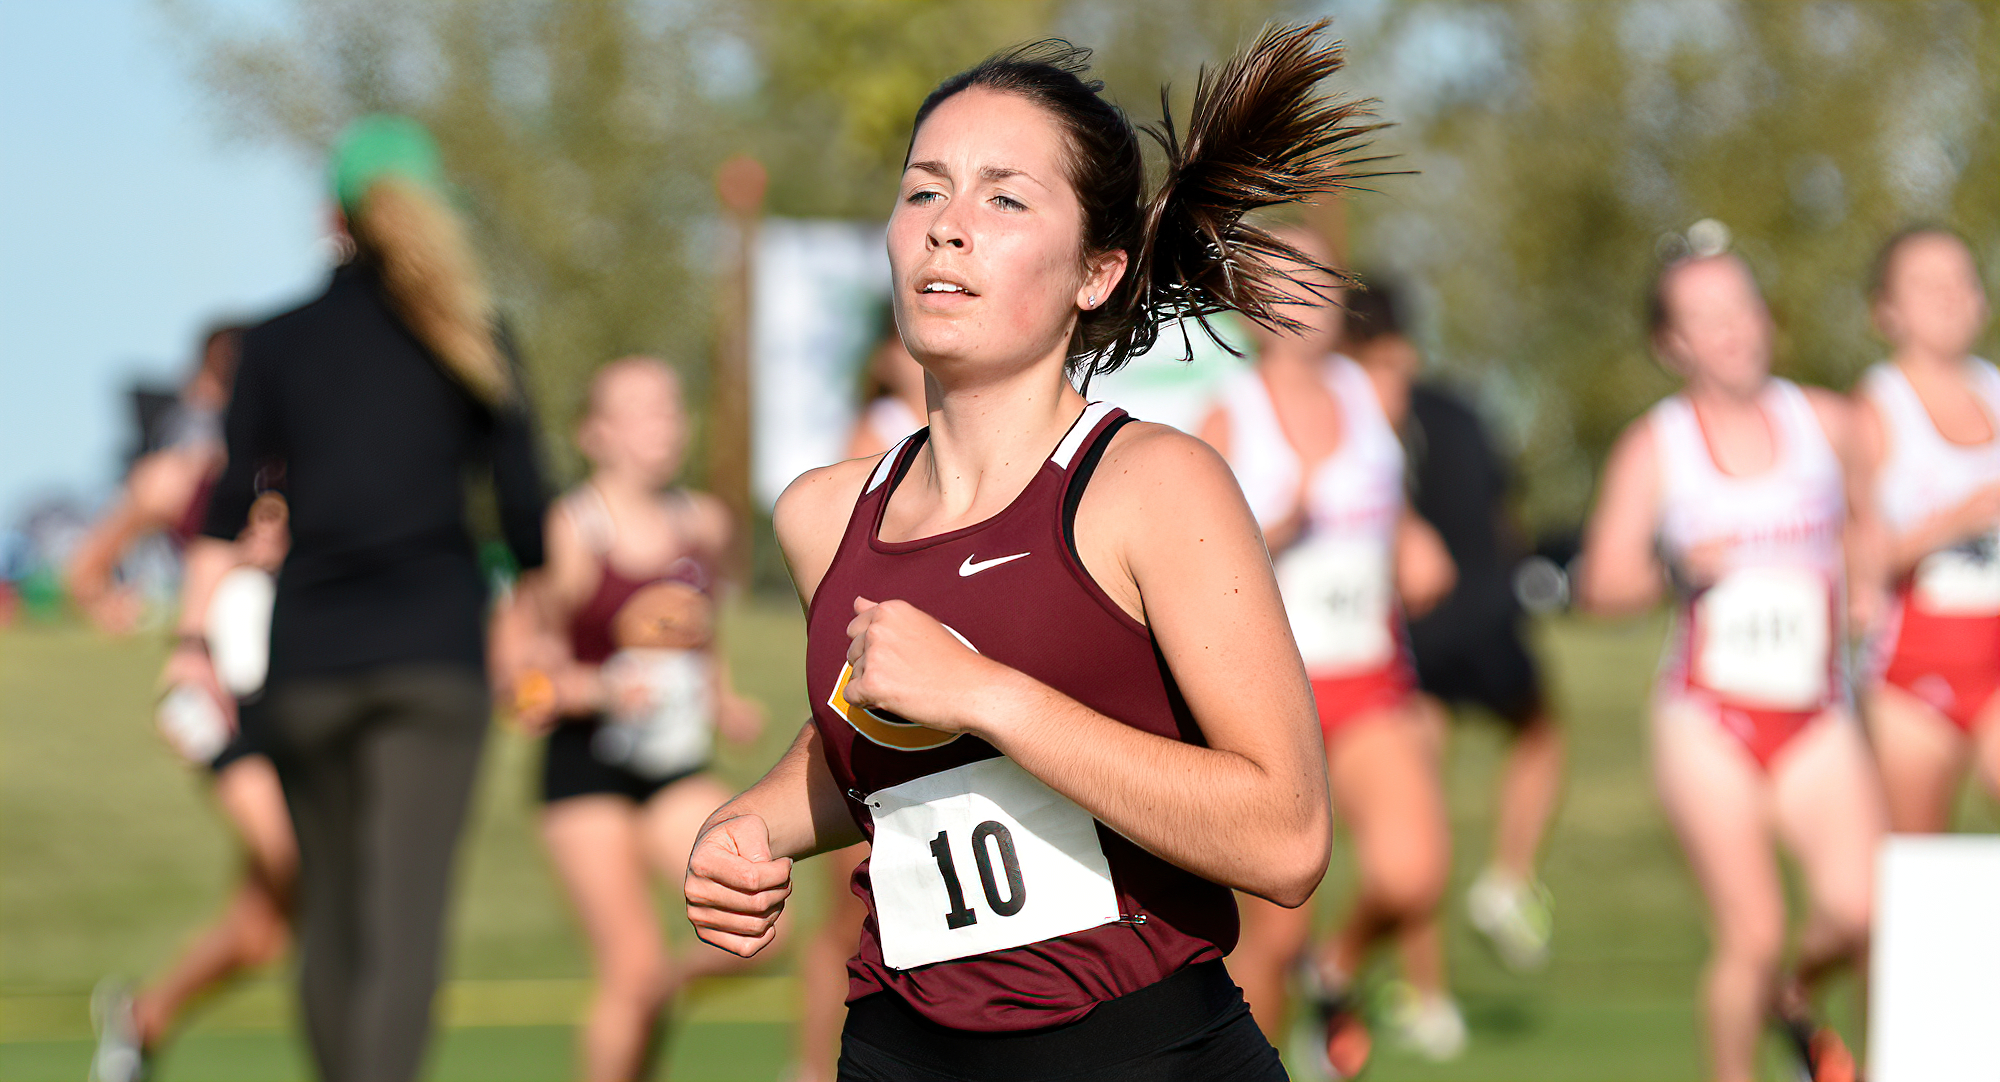 Senior Isabel Fredrickson led the Cobbers at the season-opening UND Invite. She finished the 5K course with a time of 19:40.2.